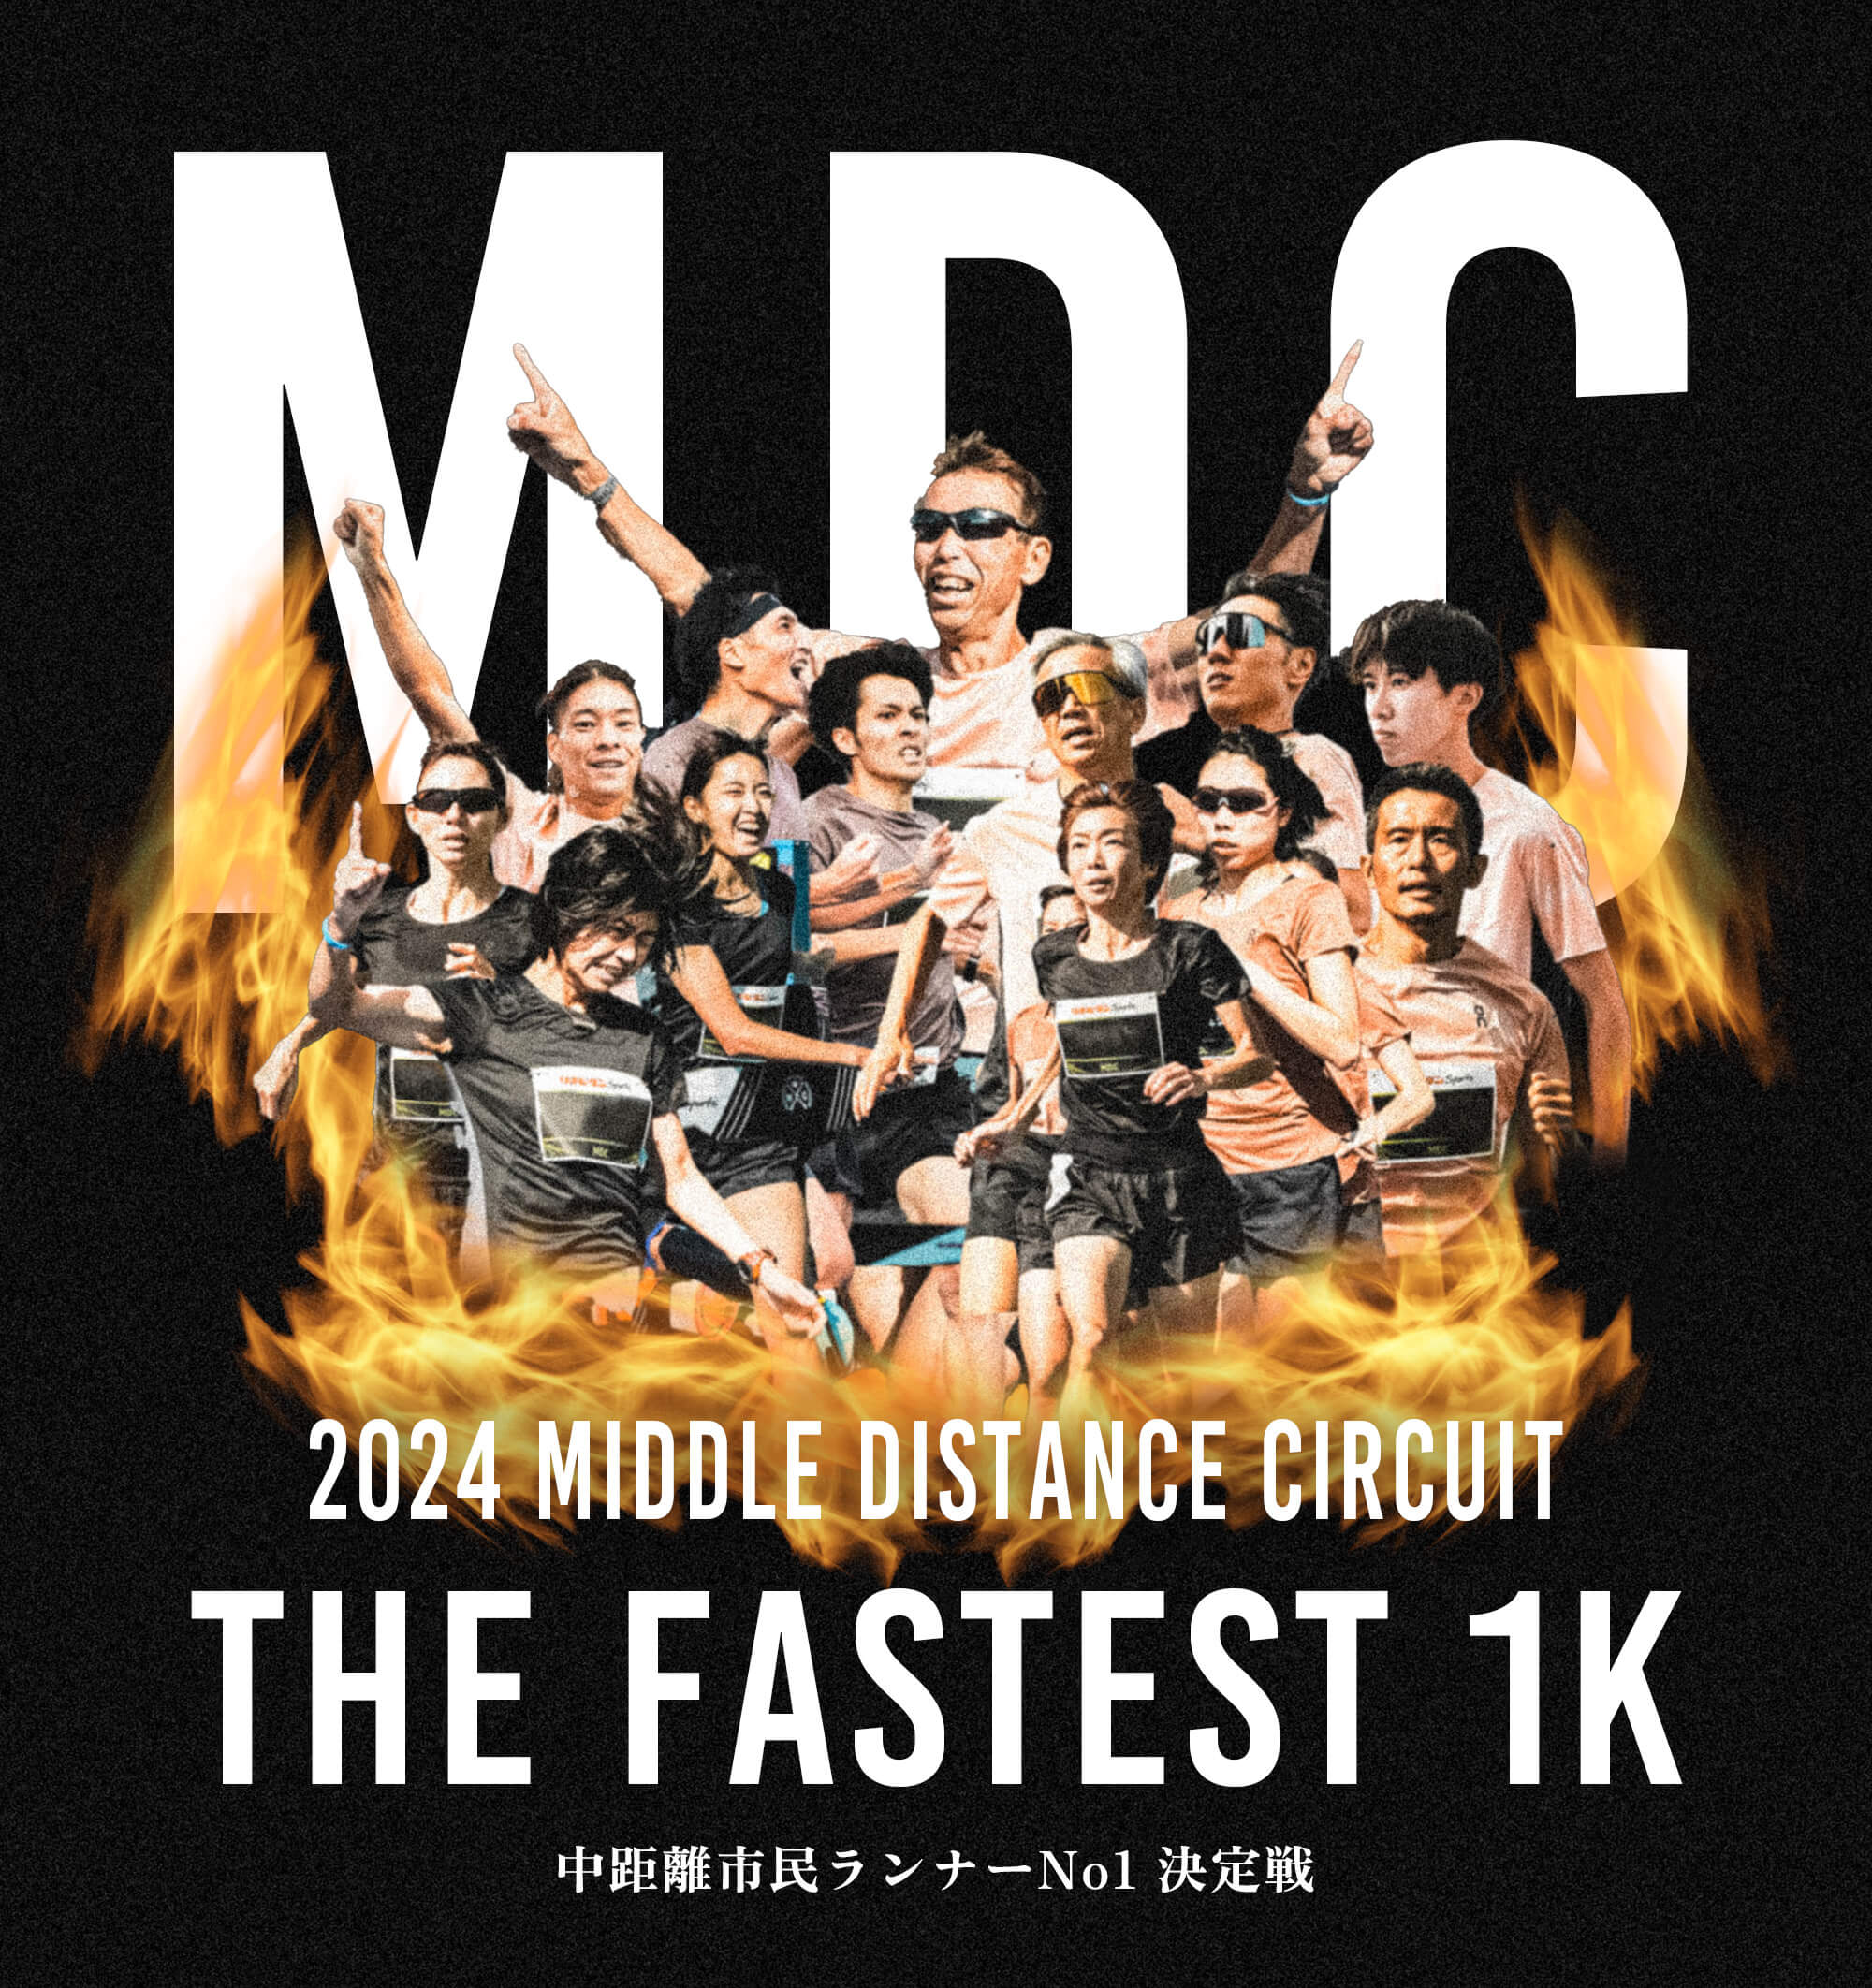 MIDDLE DISTANCE CIRCUIT 2024 Fastest 1k